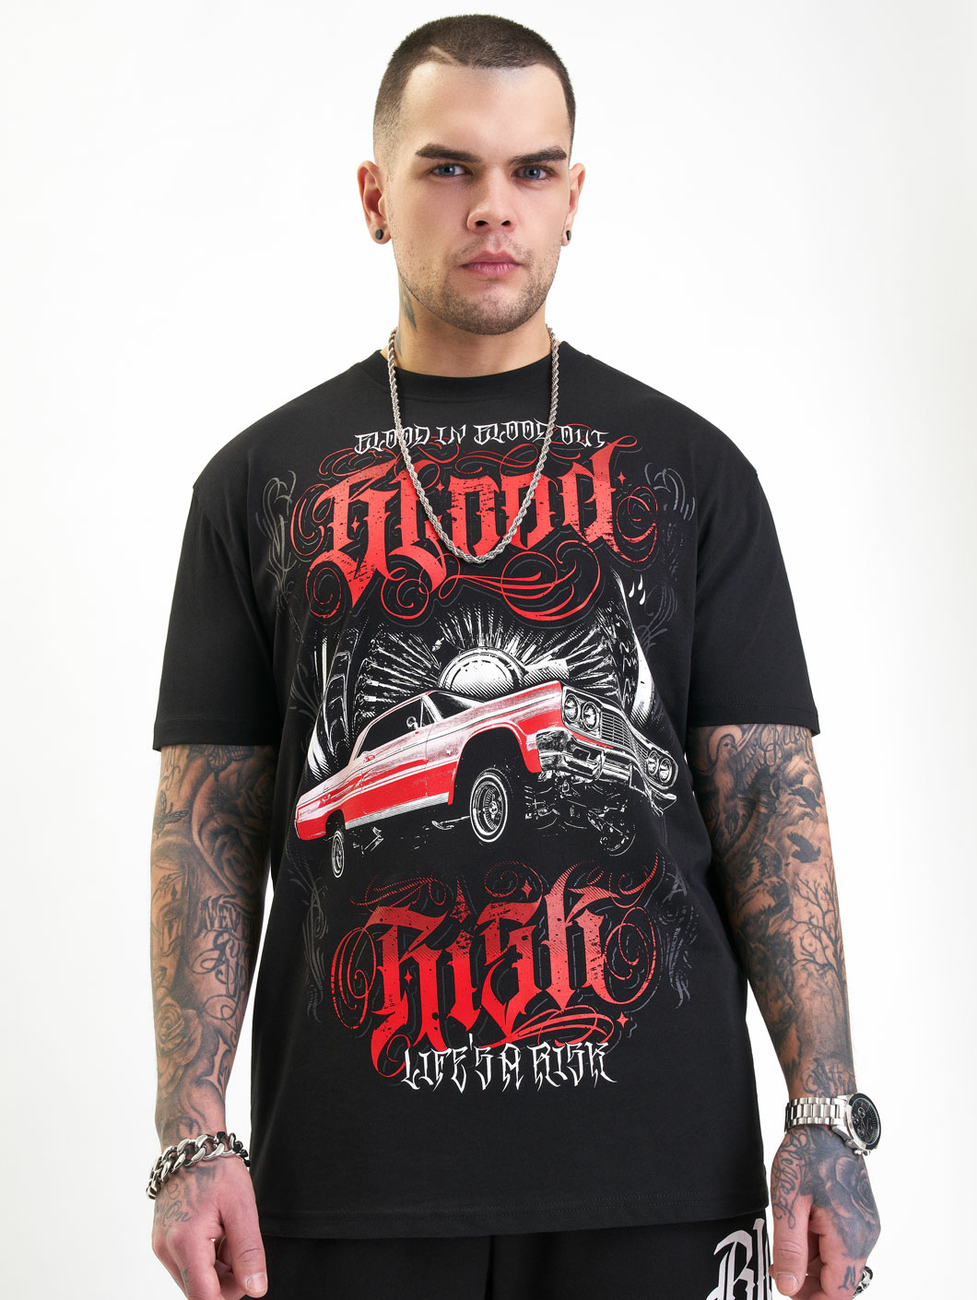 Blood In Blood Out Tavos T-Shirt L